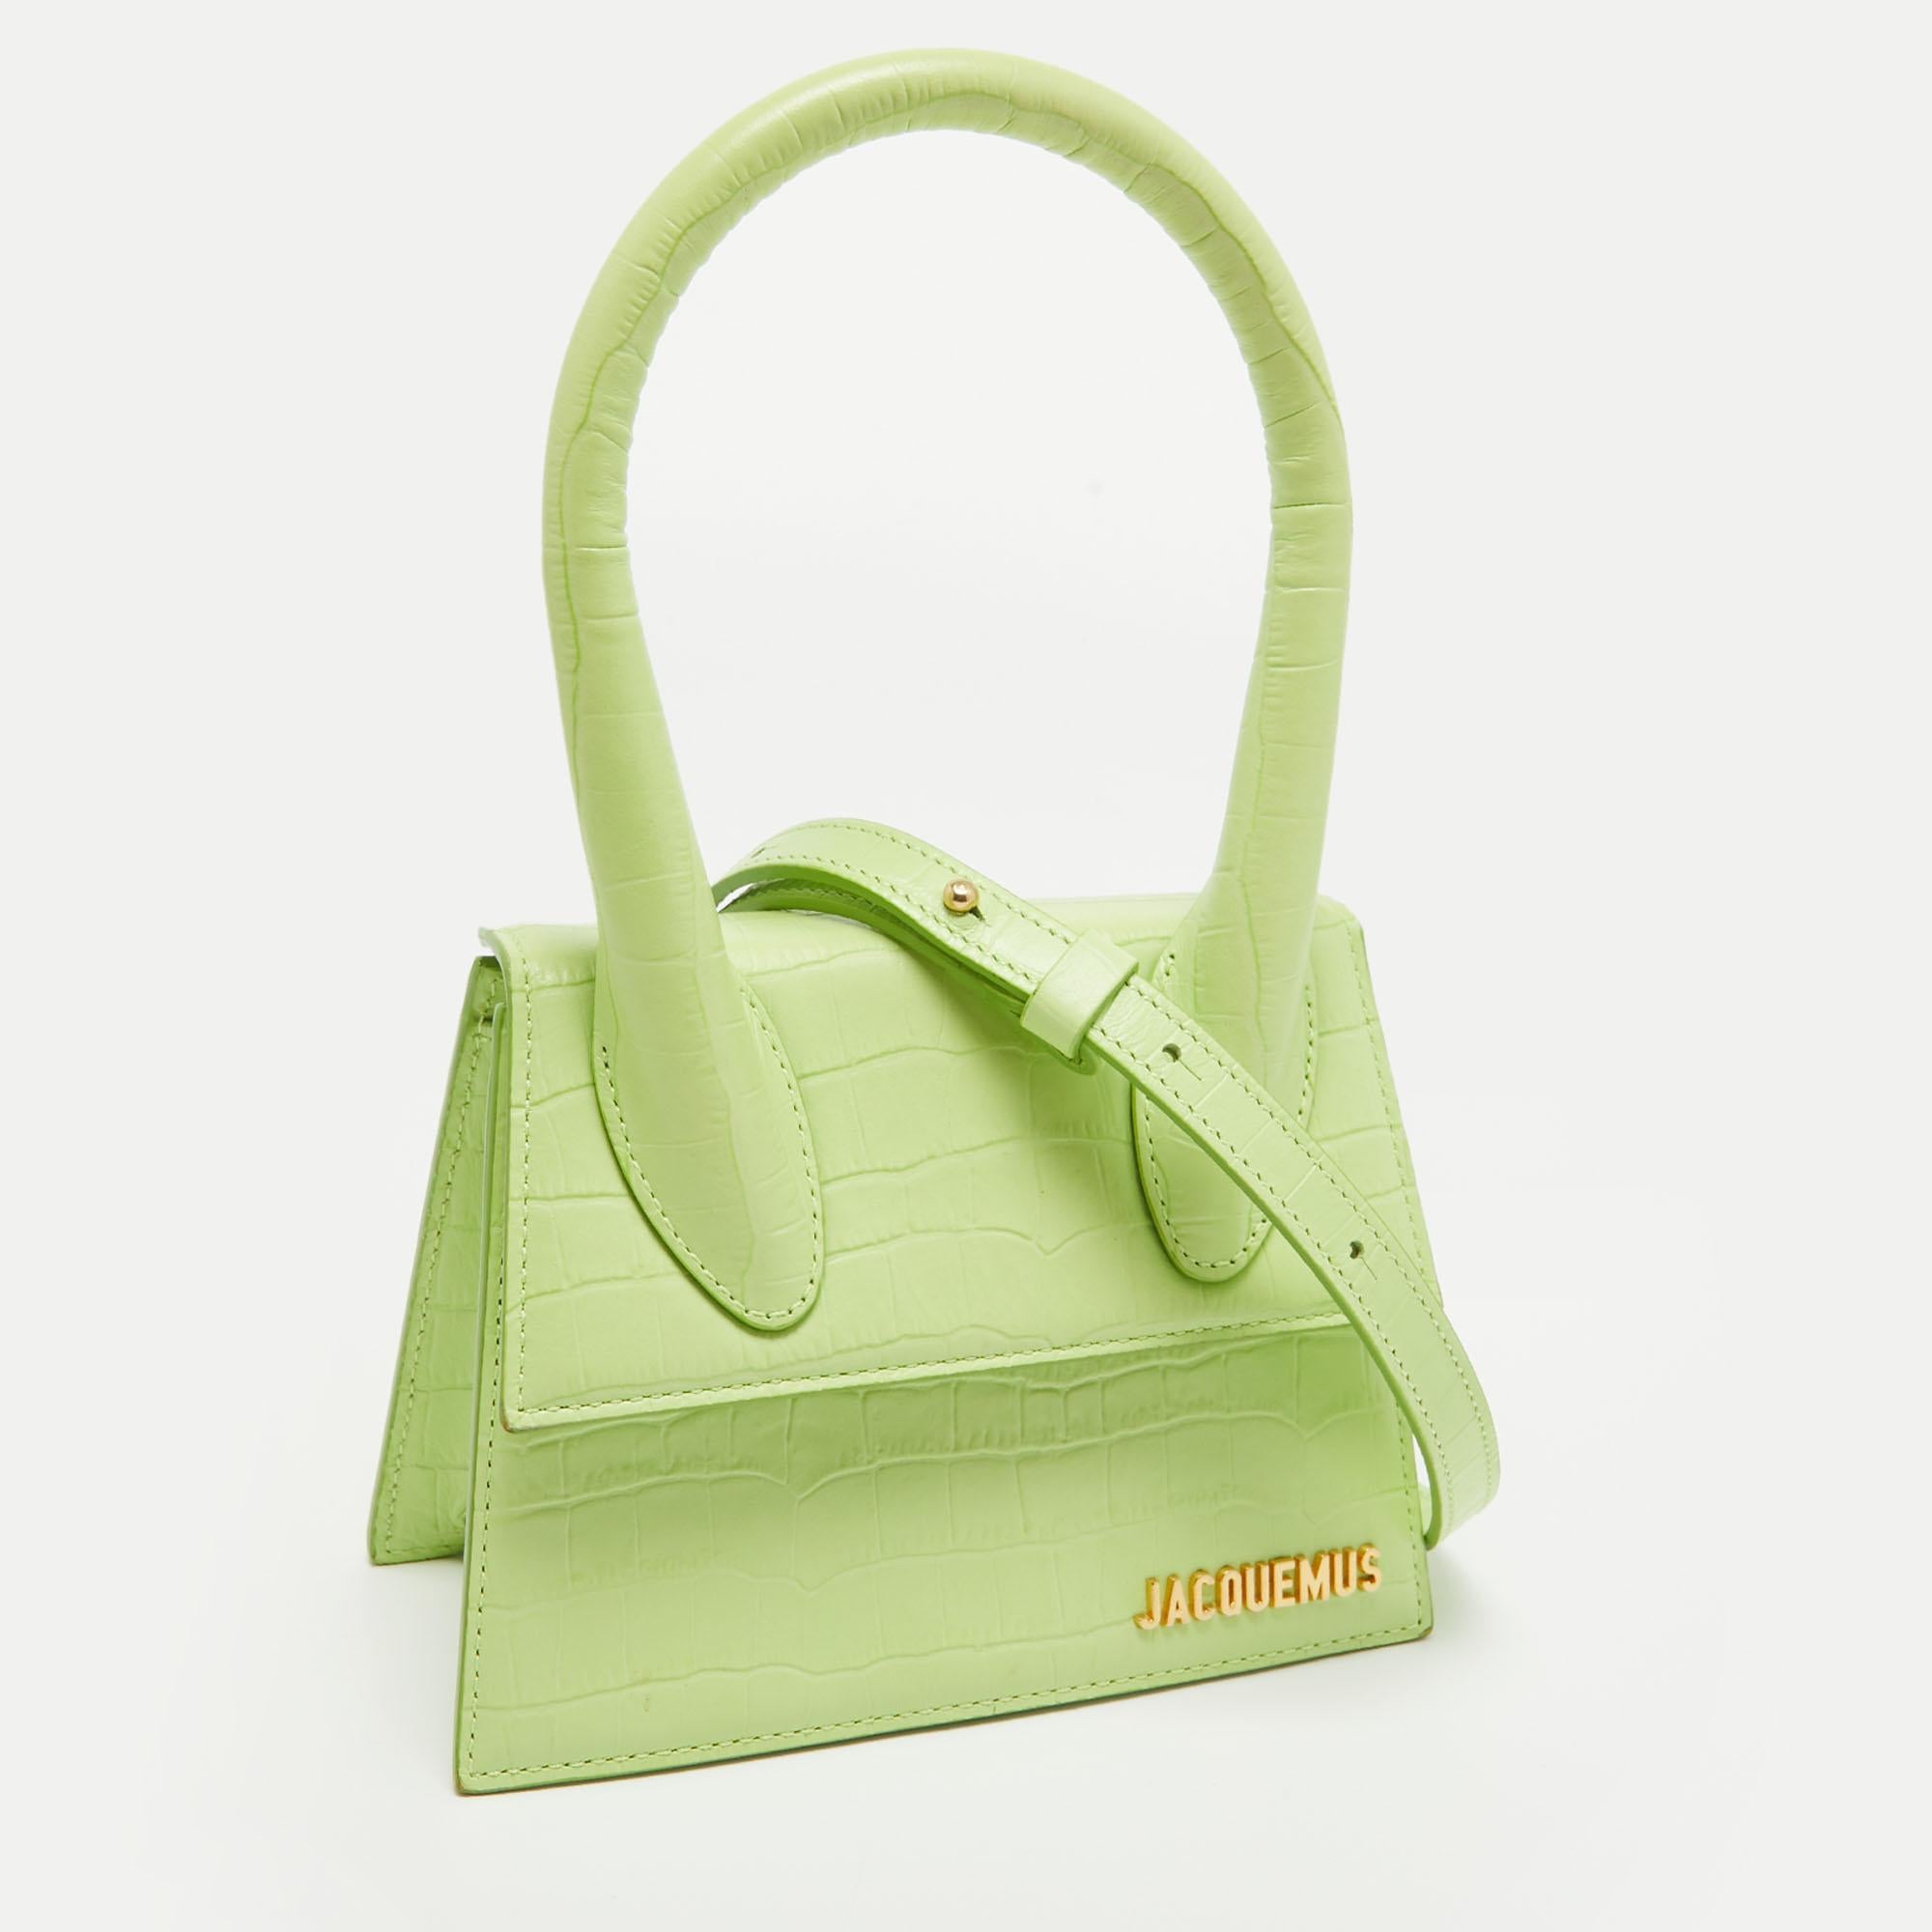 Jacquemus Light Green Croc Embossed Leather Le Chiquito Noeud Top Handle Bag 5